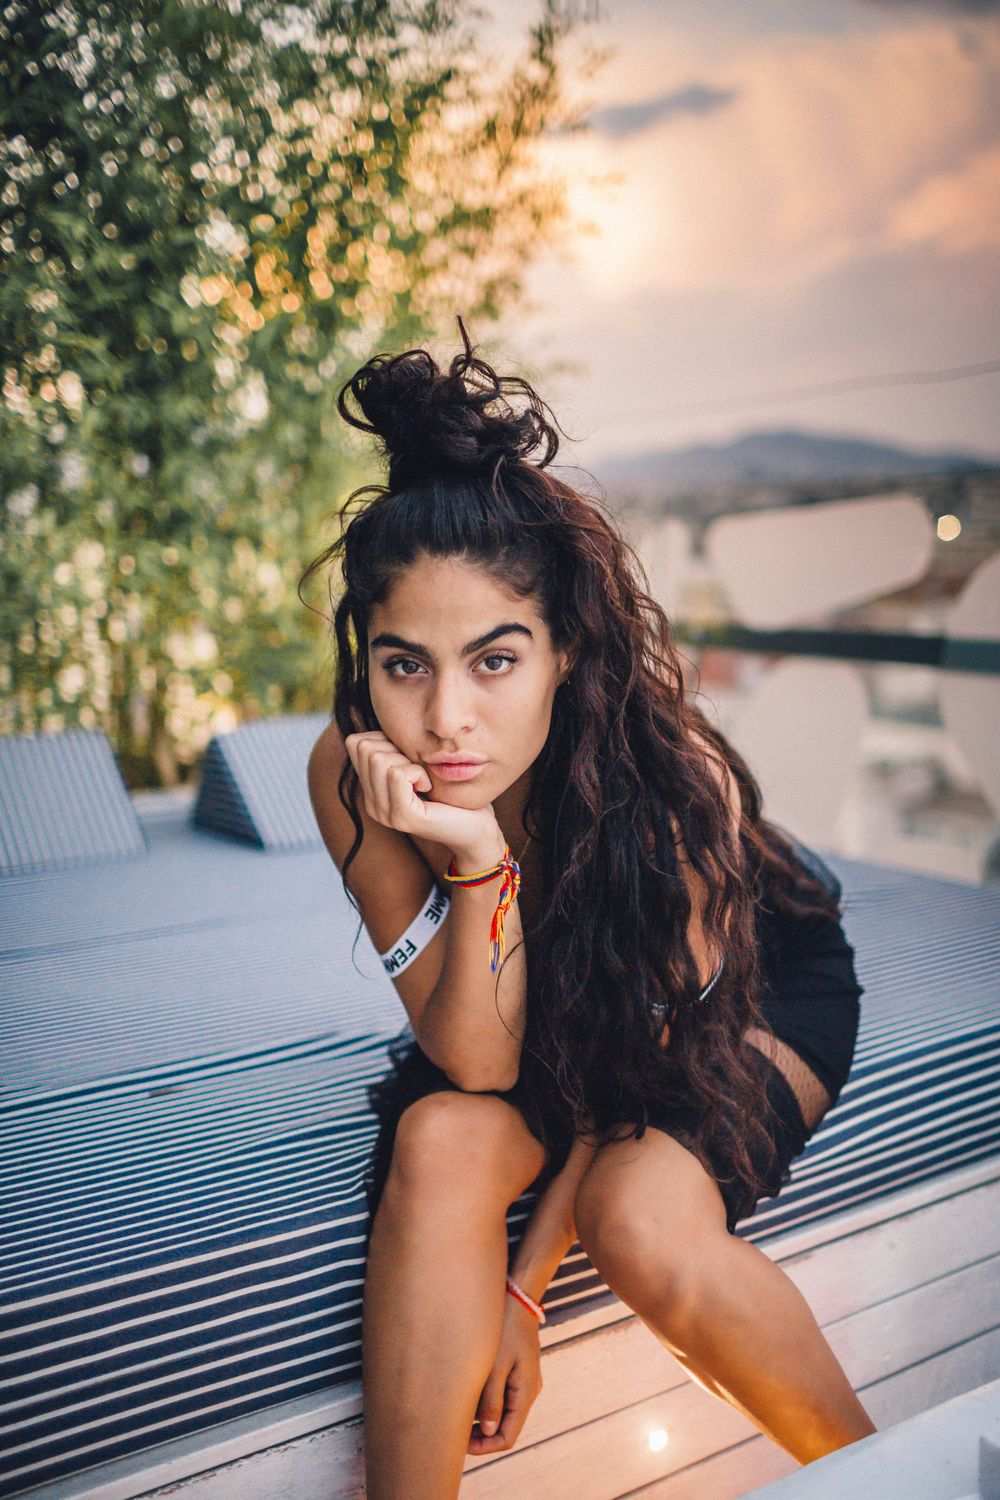 51 Hot Pictures Of Jessie Reyez Will Leave You Flabbergasted By Her Hot Magnificence 536